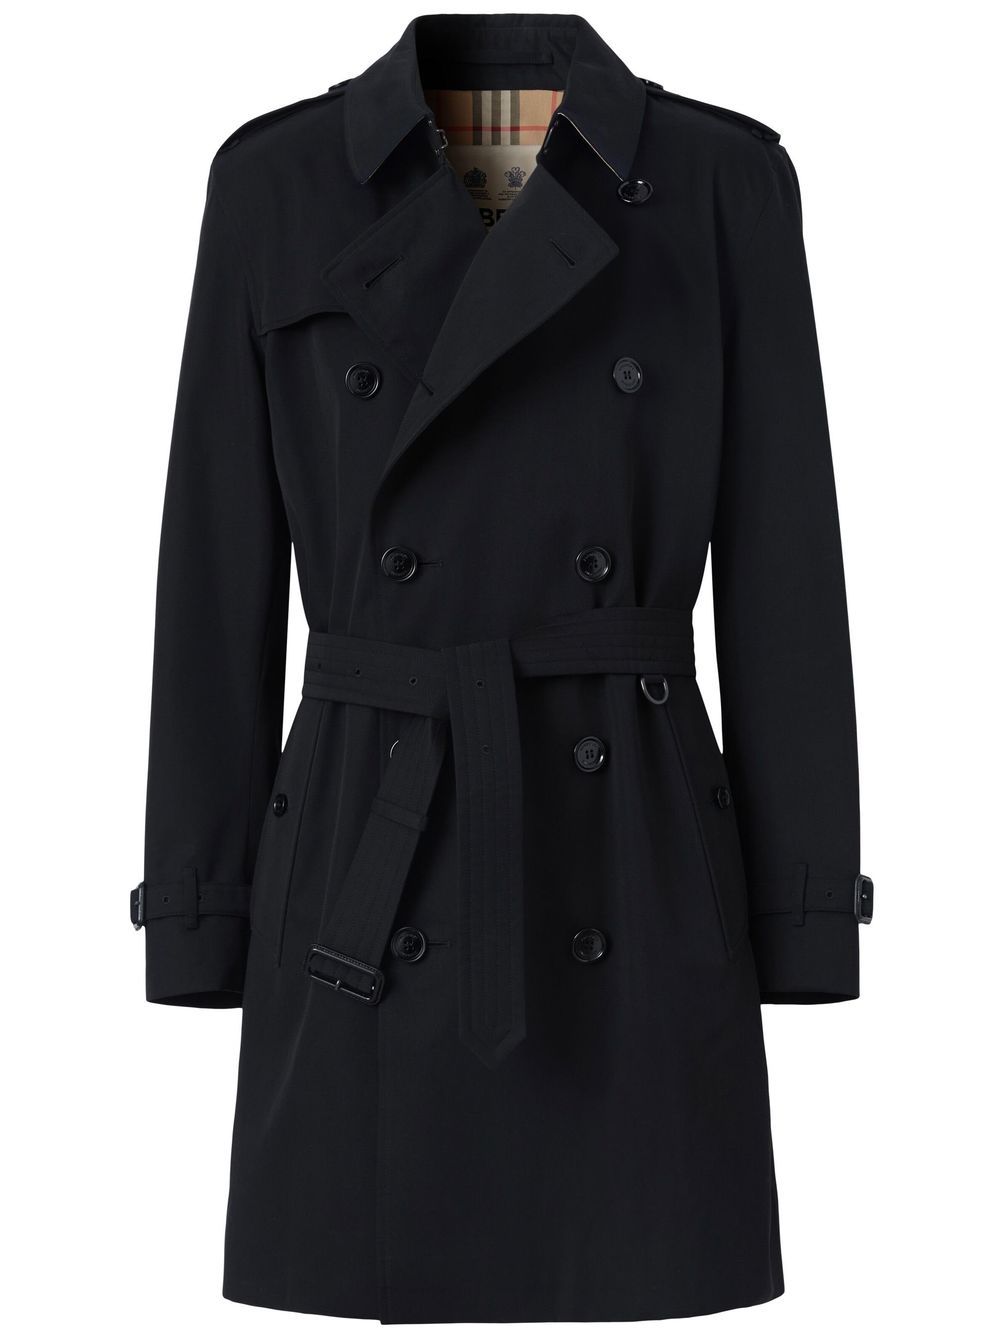 Burberry Kensington double-breasted trench coat - Black